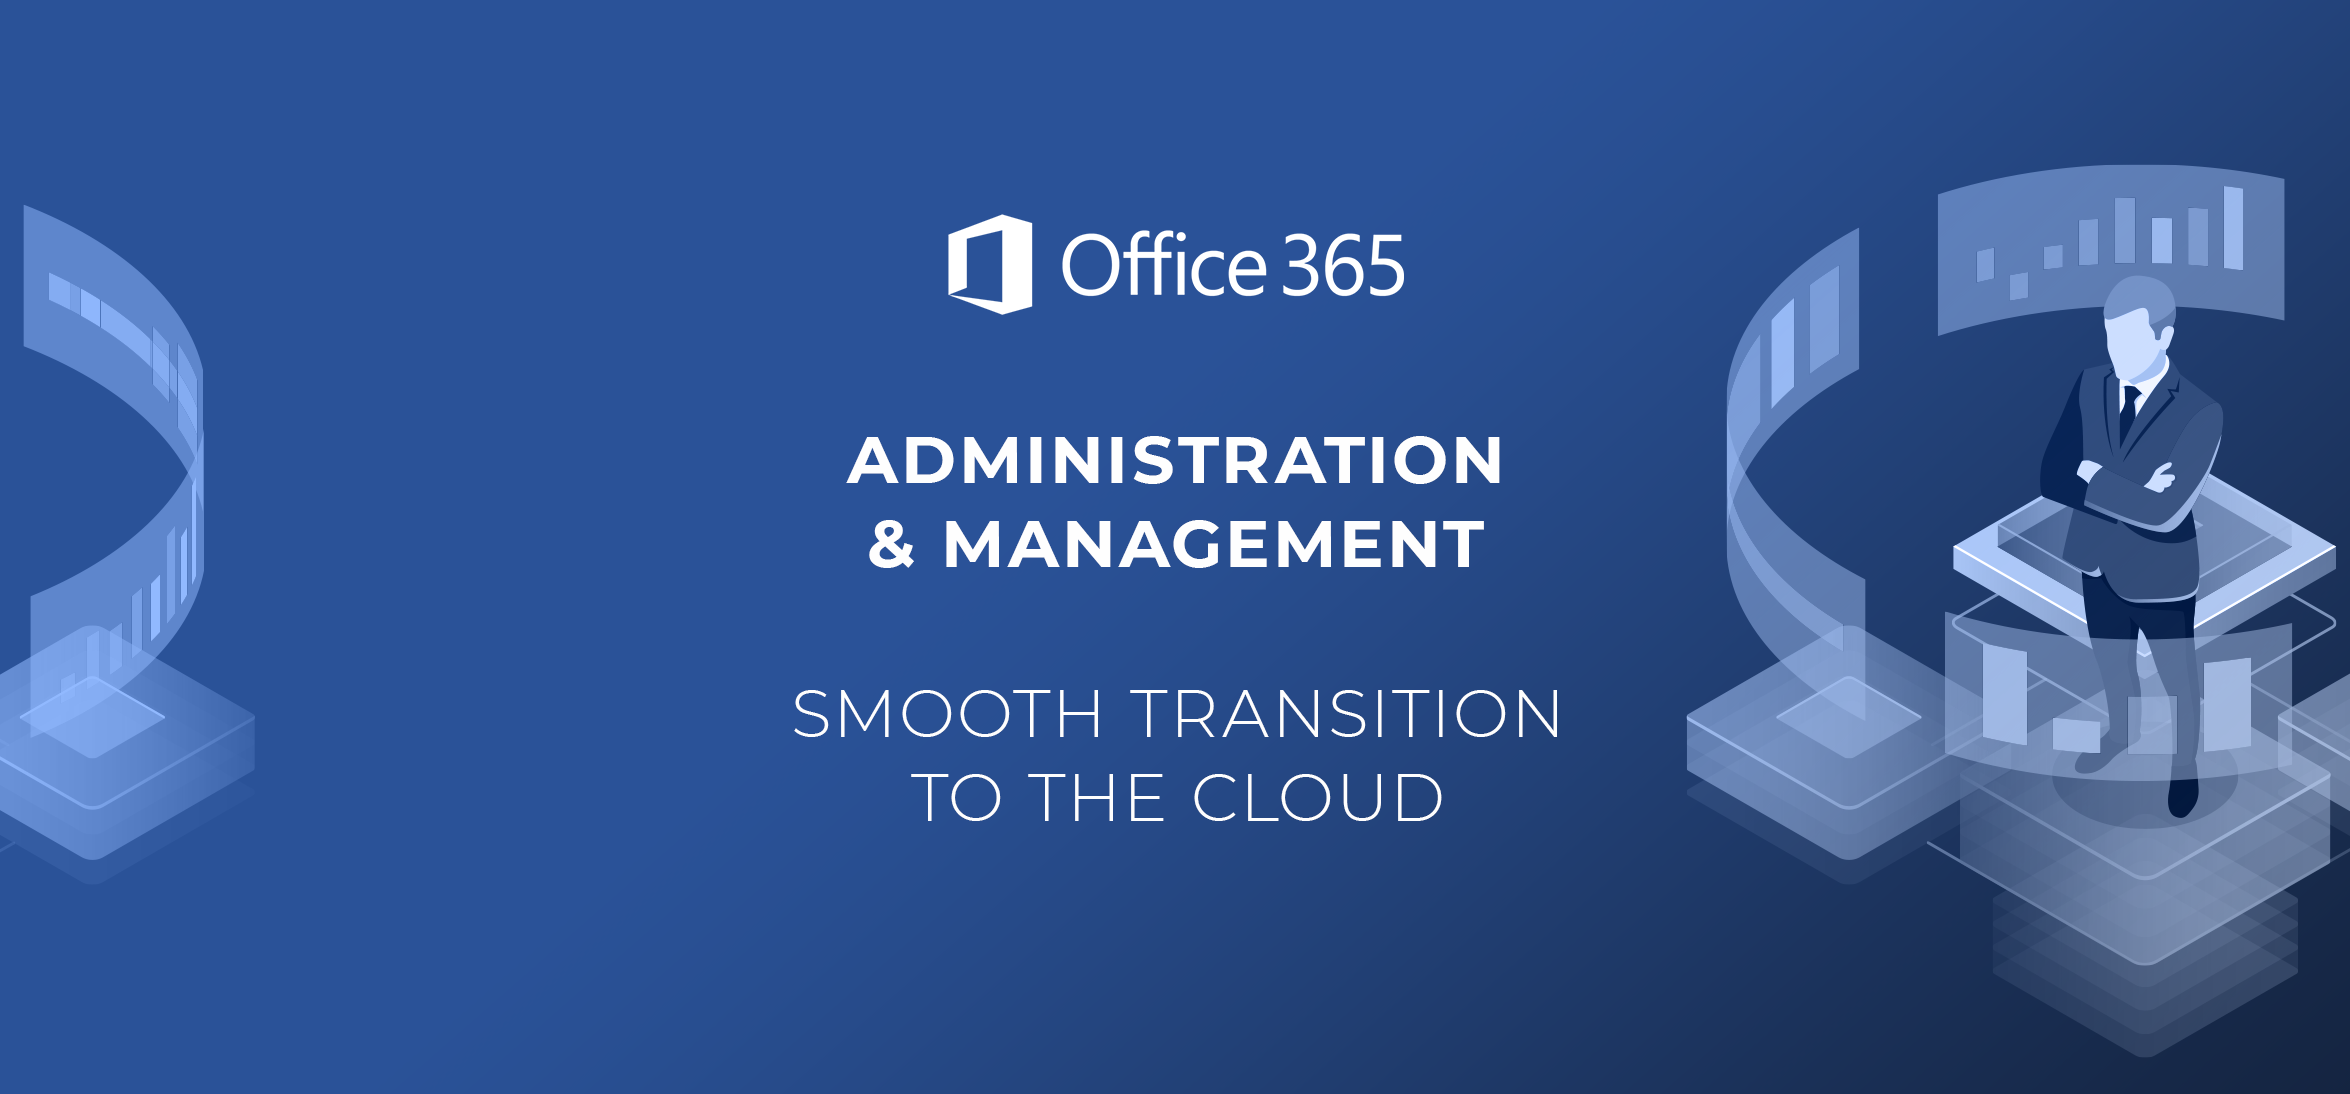 Microsoft Office 365 Administration Services in Camp Pendleton CA, 92055